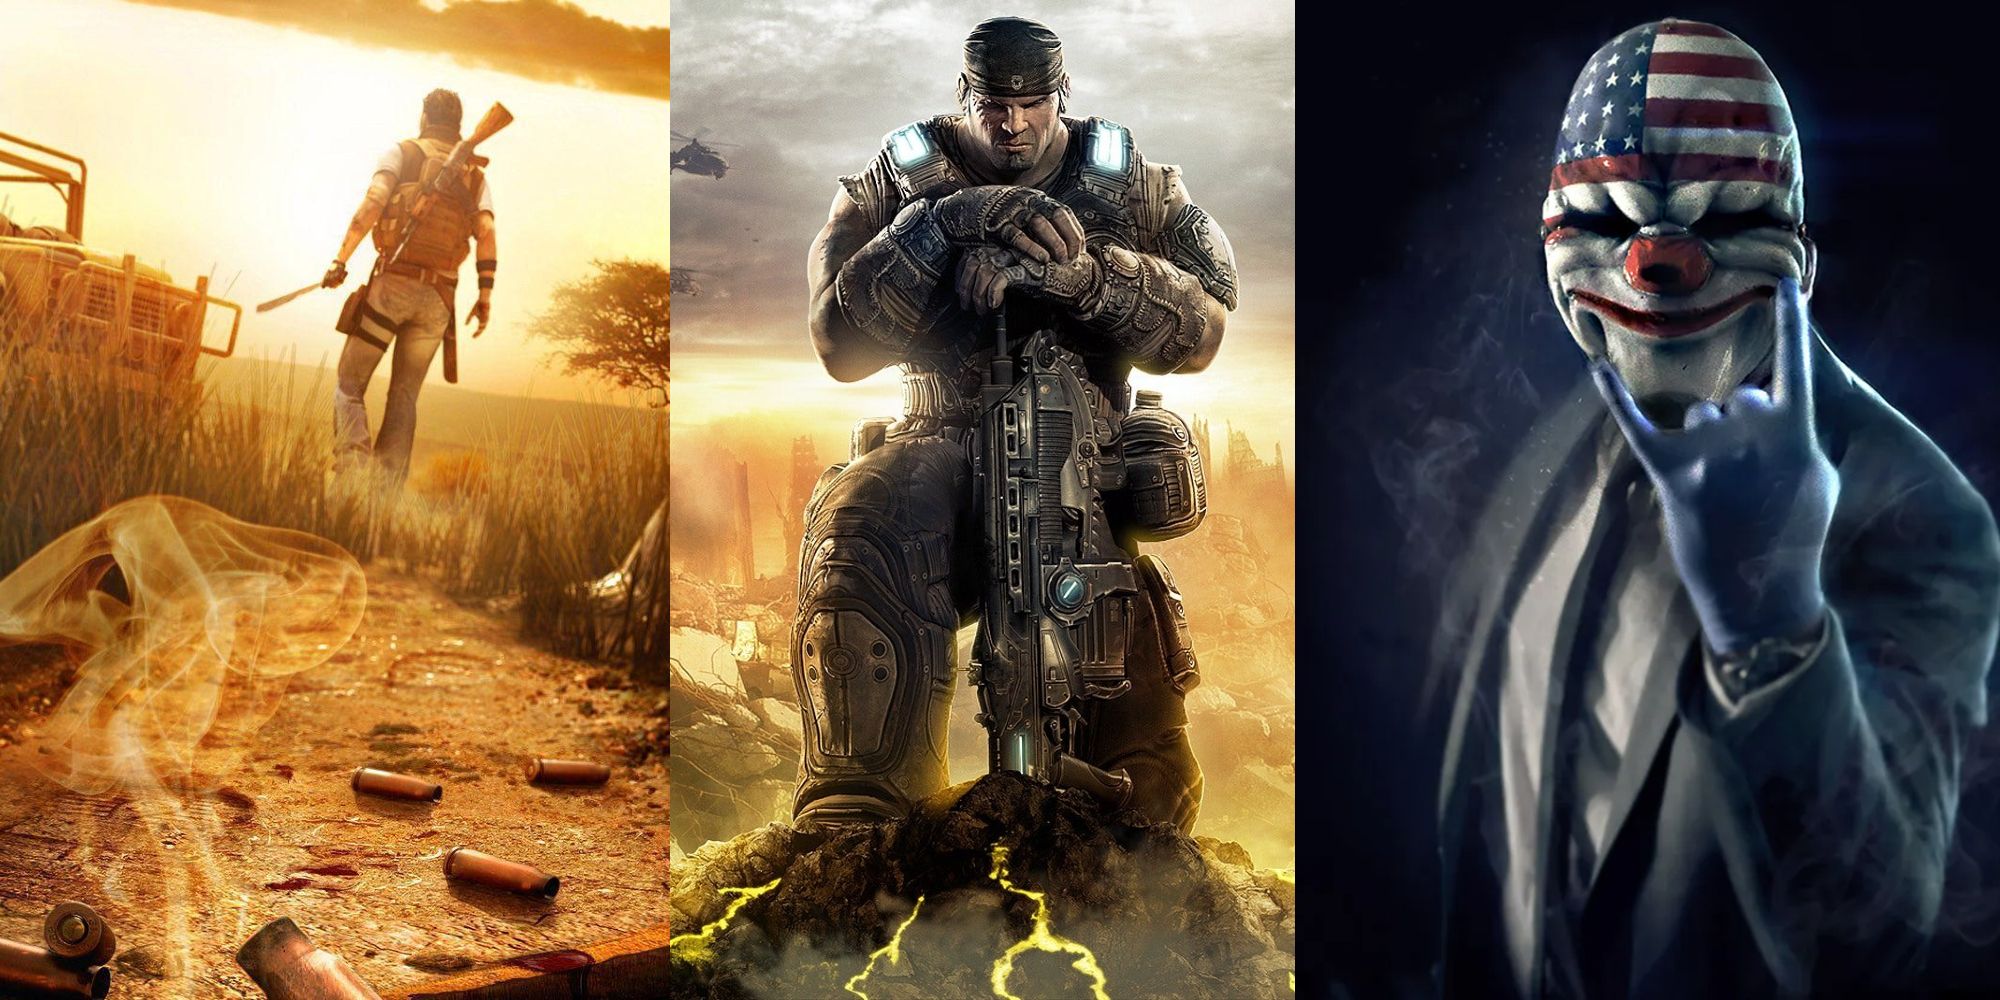 Split Image of Far Cry 2, Payday 2, and Gears of War 3